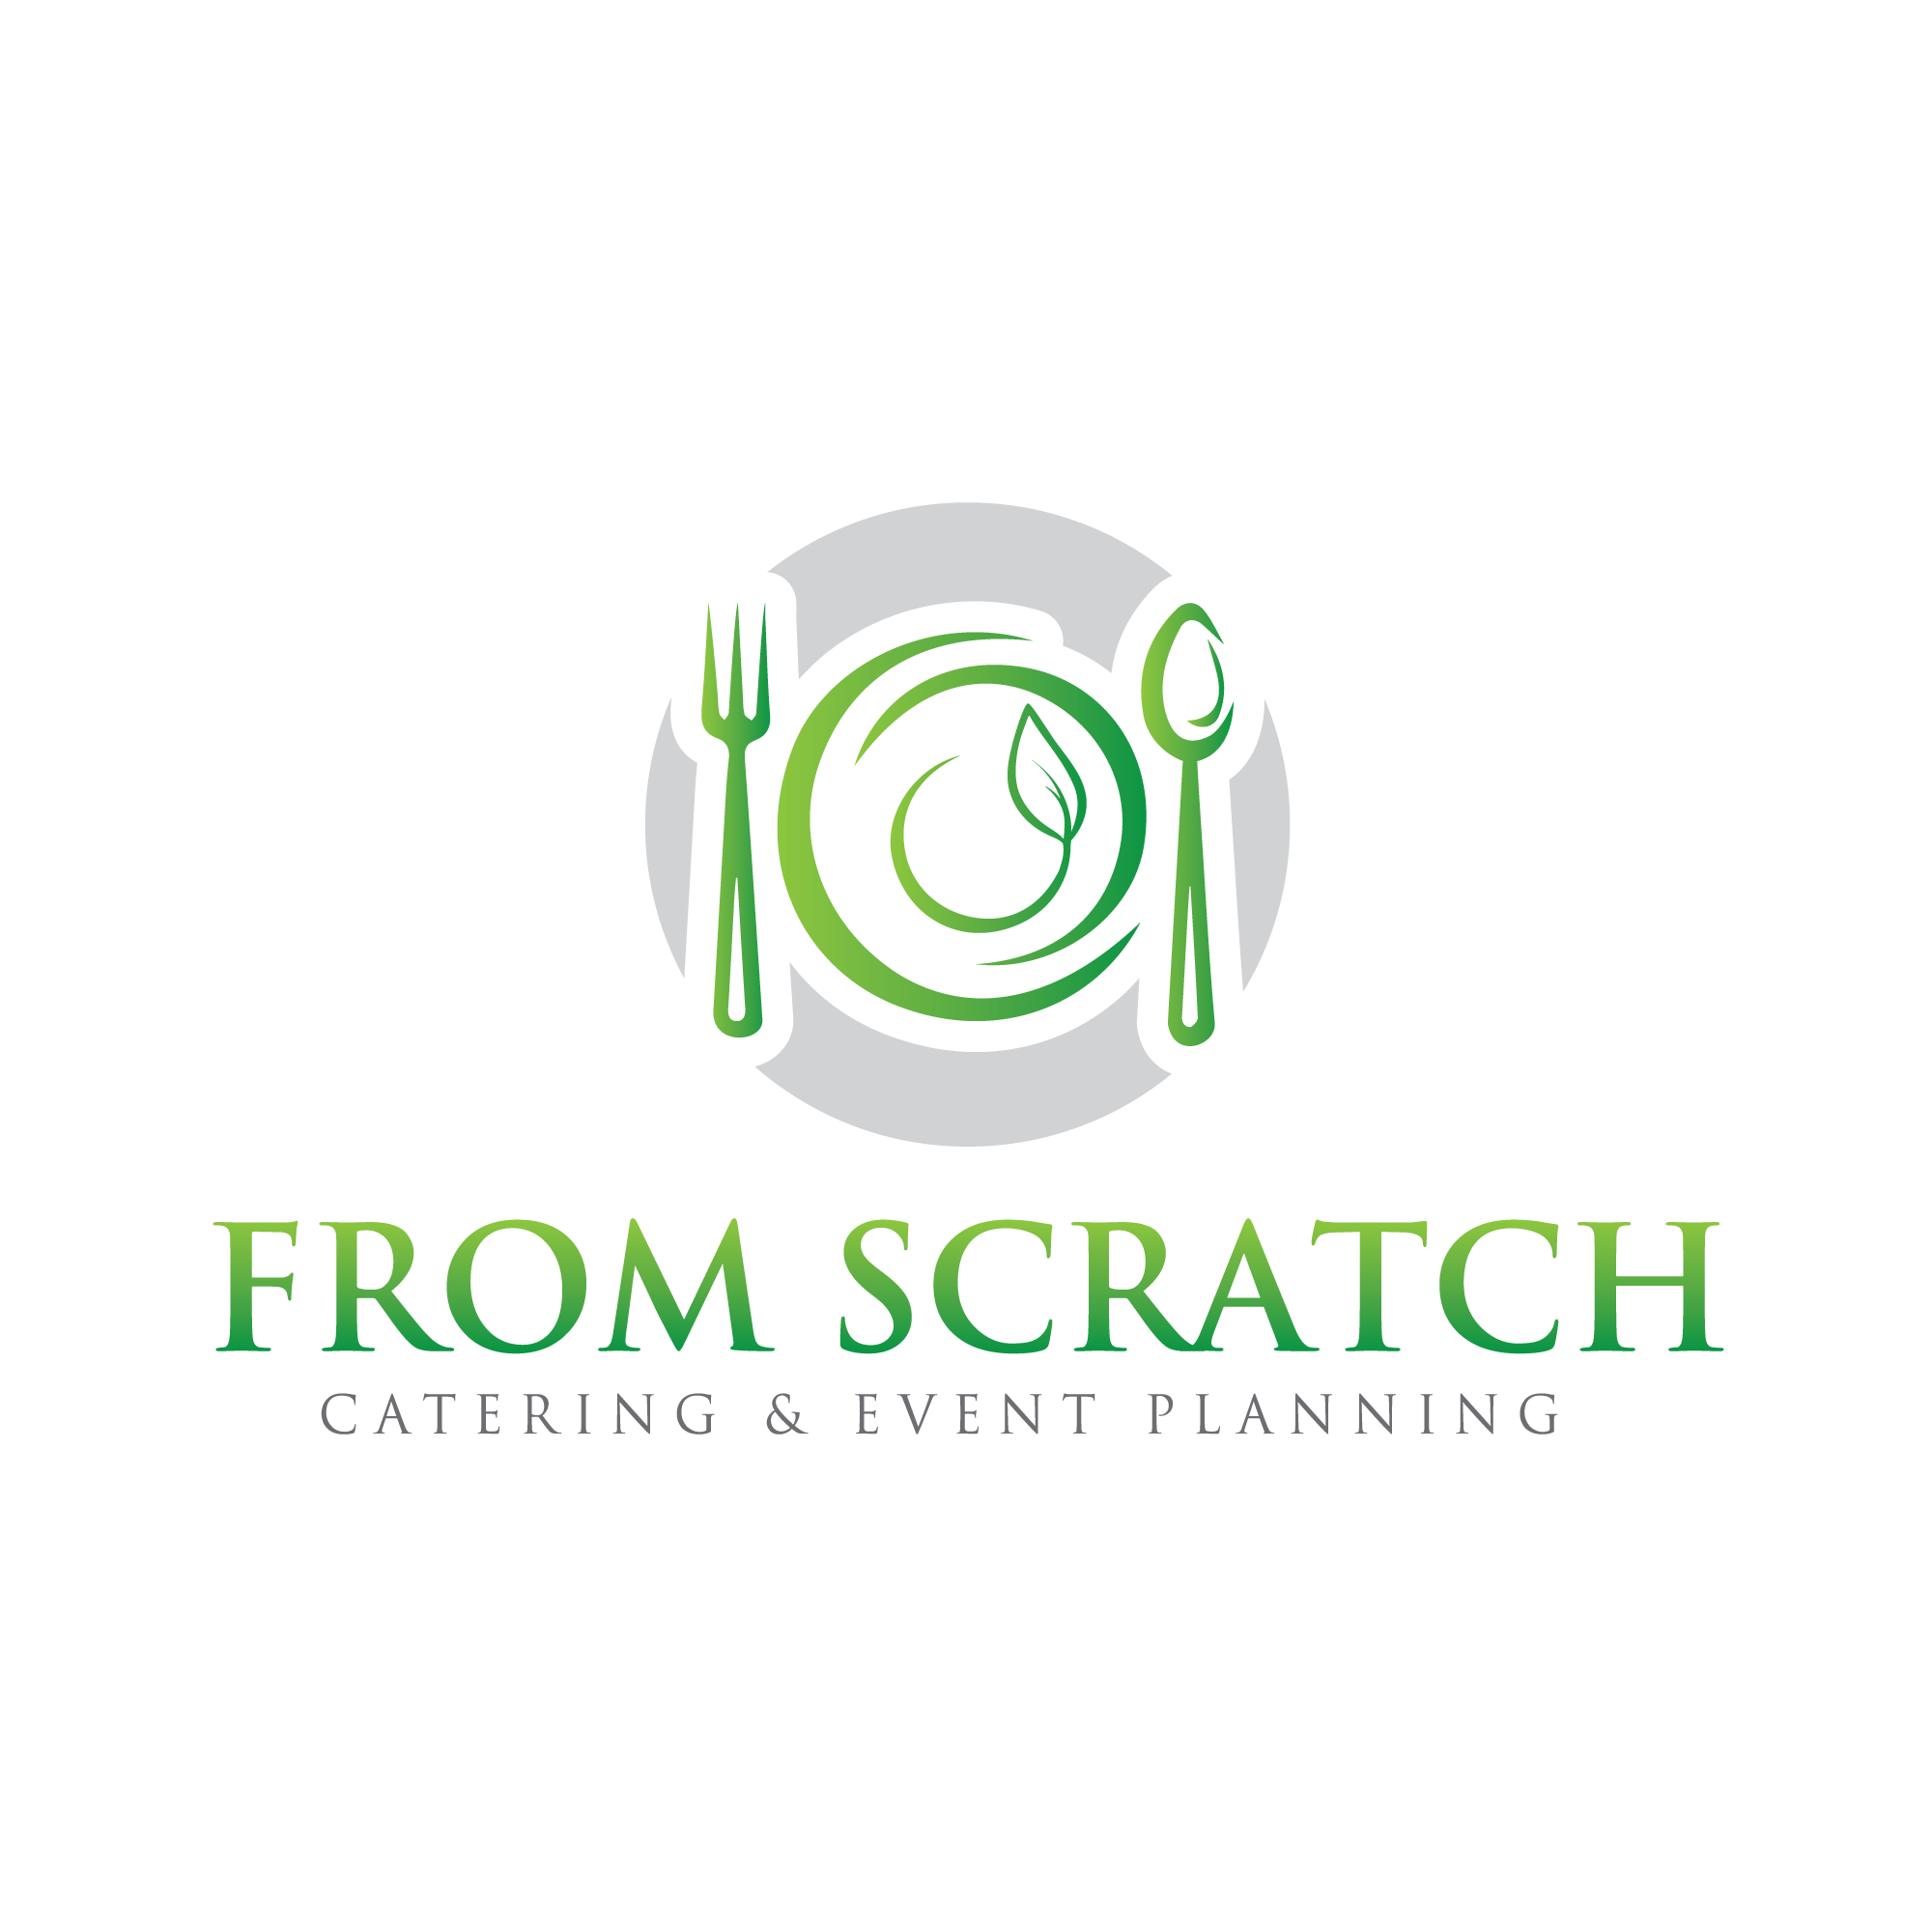 From Scratch Catering & Event Planning | Caterers - The Knot